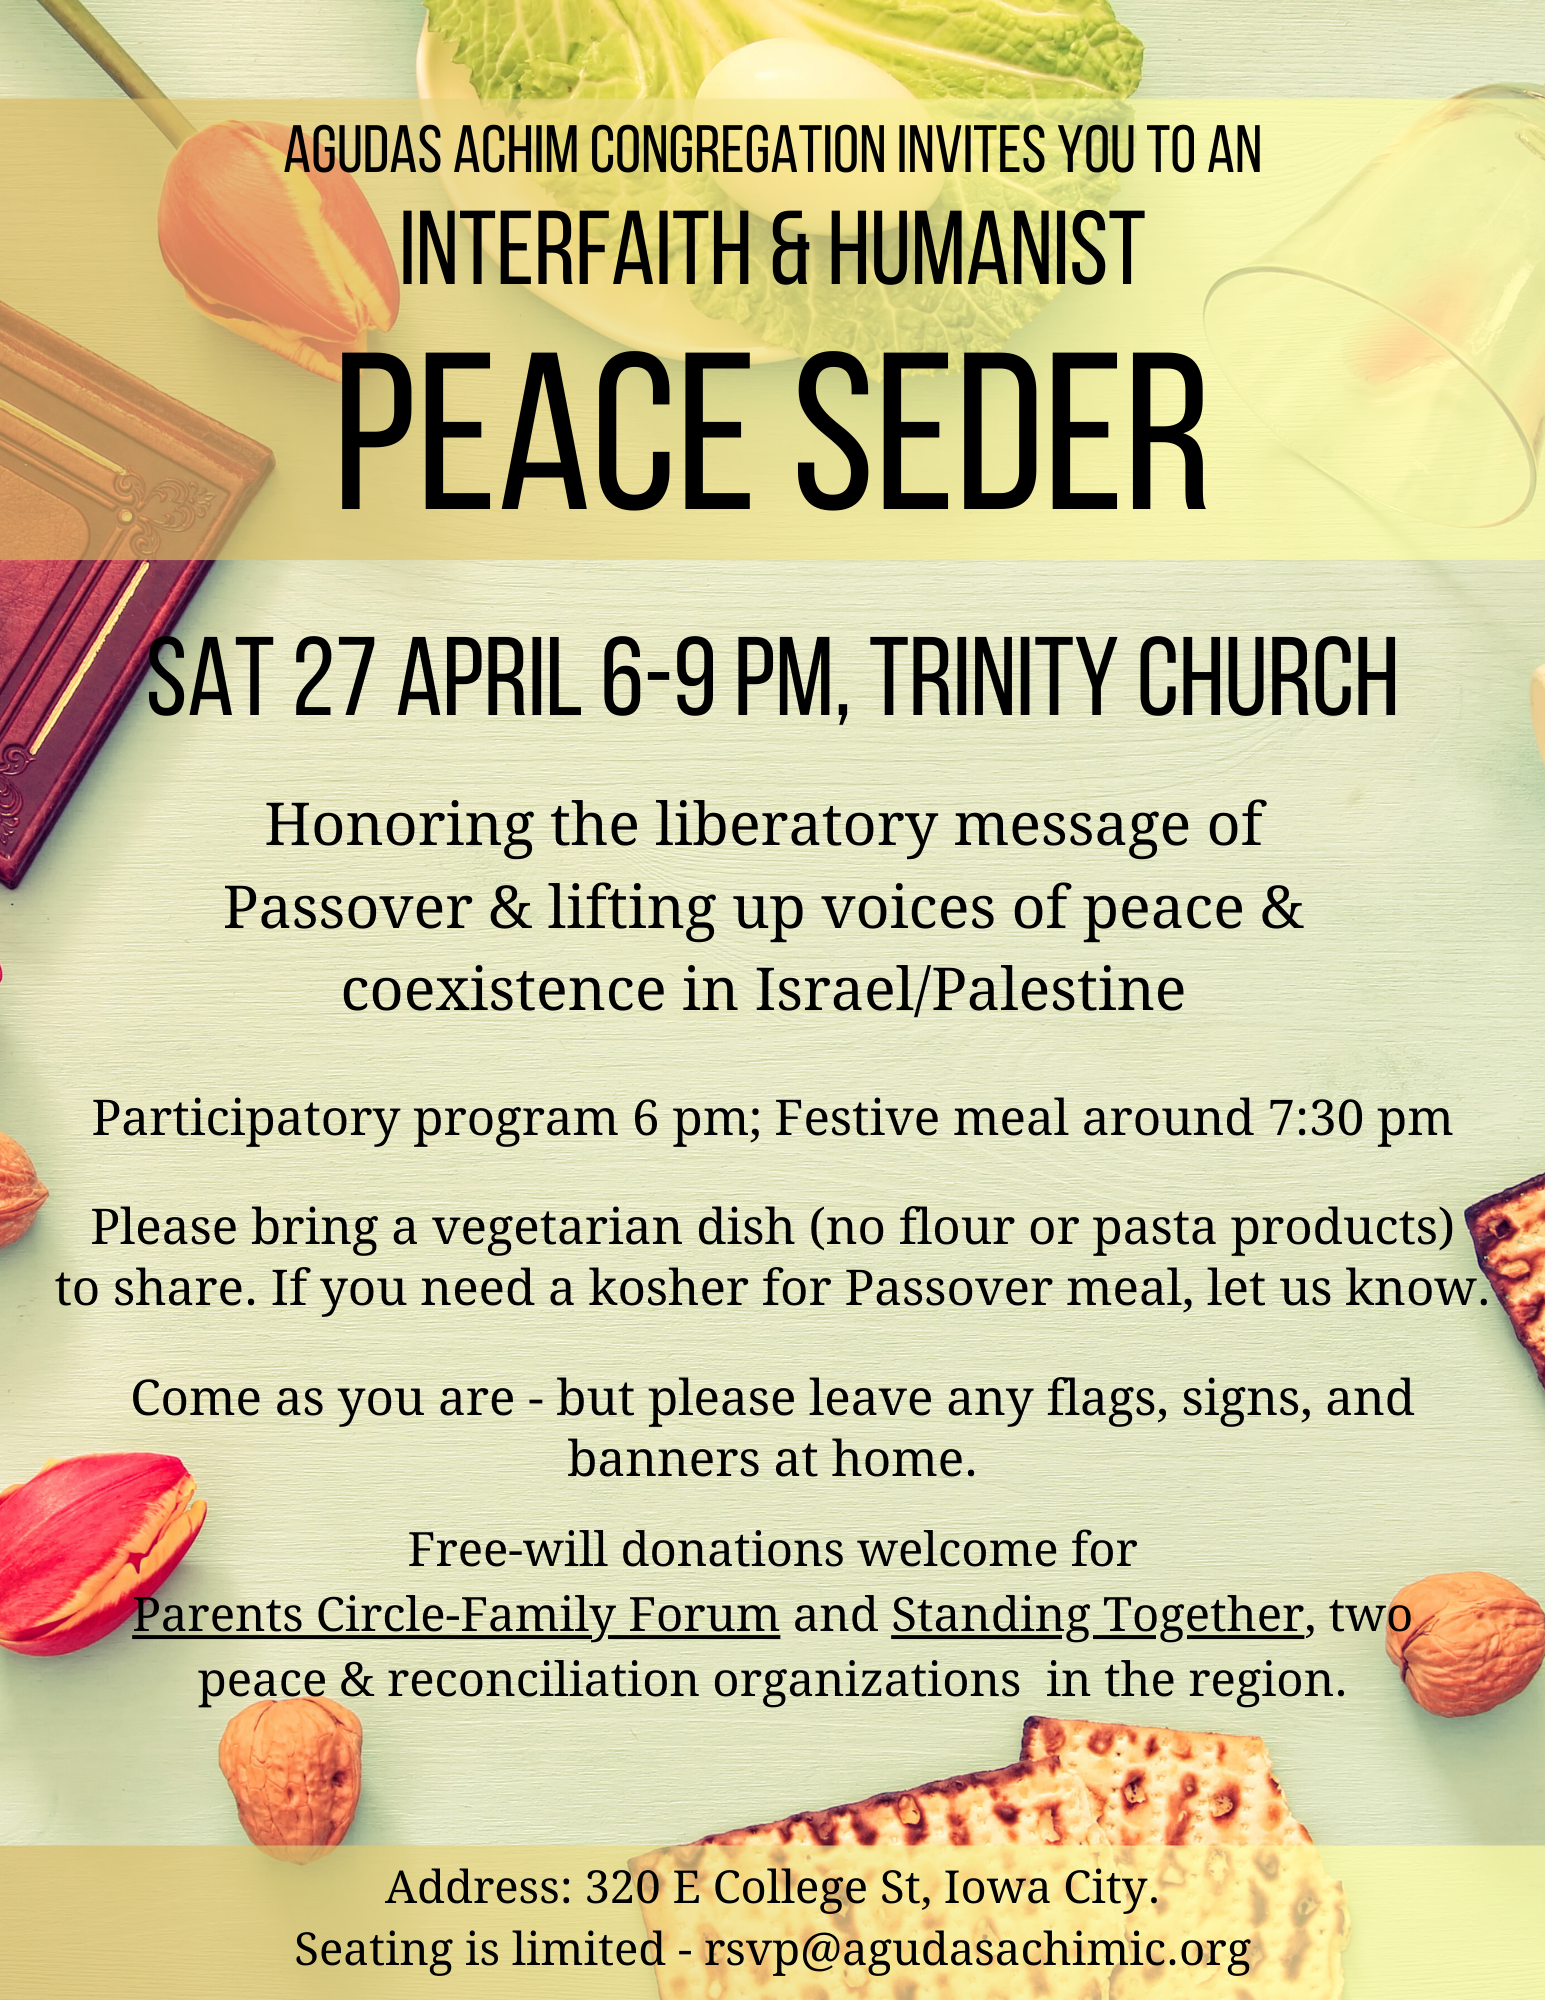 Agudas Achim Congregation Invites You to an Interfaith & Humanist Peace Seder, Sat 27 April 6-9 PM, Trinity Church.
Honoring the liberatory message of Passover & lifting up voices of peace & coexistence in Israel/Palestine.

Participatory program 6 pm; Festive meal around 7:30 pm.
Please bring a vegetarian dish (no flour or pasta products) to share. If you need a kosher for Passover meal, let us know.
Come as you are - but please leave any flags, signs, and banners at home.
Free-will donations welcome for Parents Circle-Family Forum and Standing Together, two peace & reconciliation organizations in the region.

Address: 320 E College St, Iowa City.
Seating is limited - email rsvp@agudasachimic.org